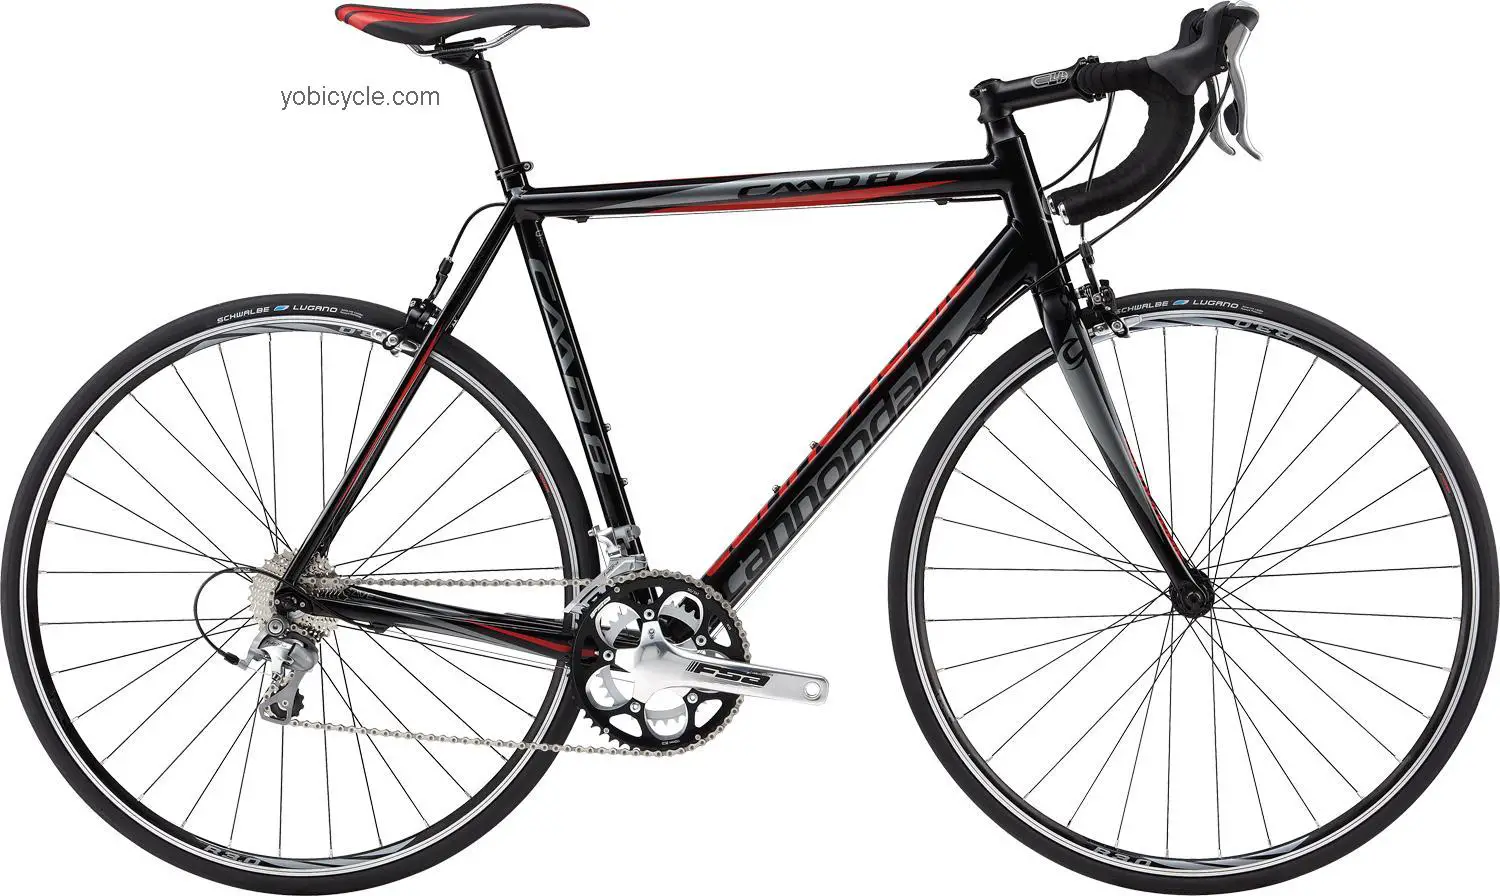 Cannondale CAAD8 6 Tiagra 2013 comparison online with competitors